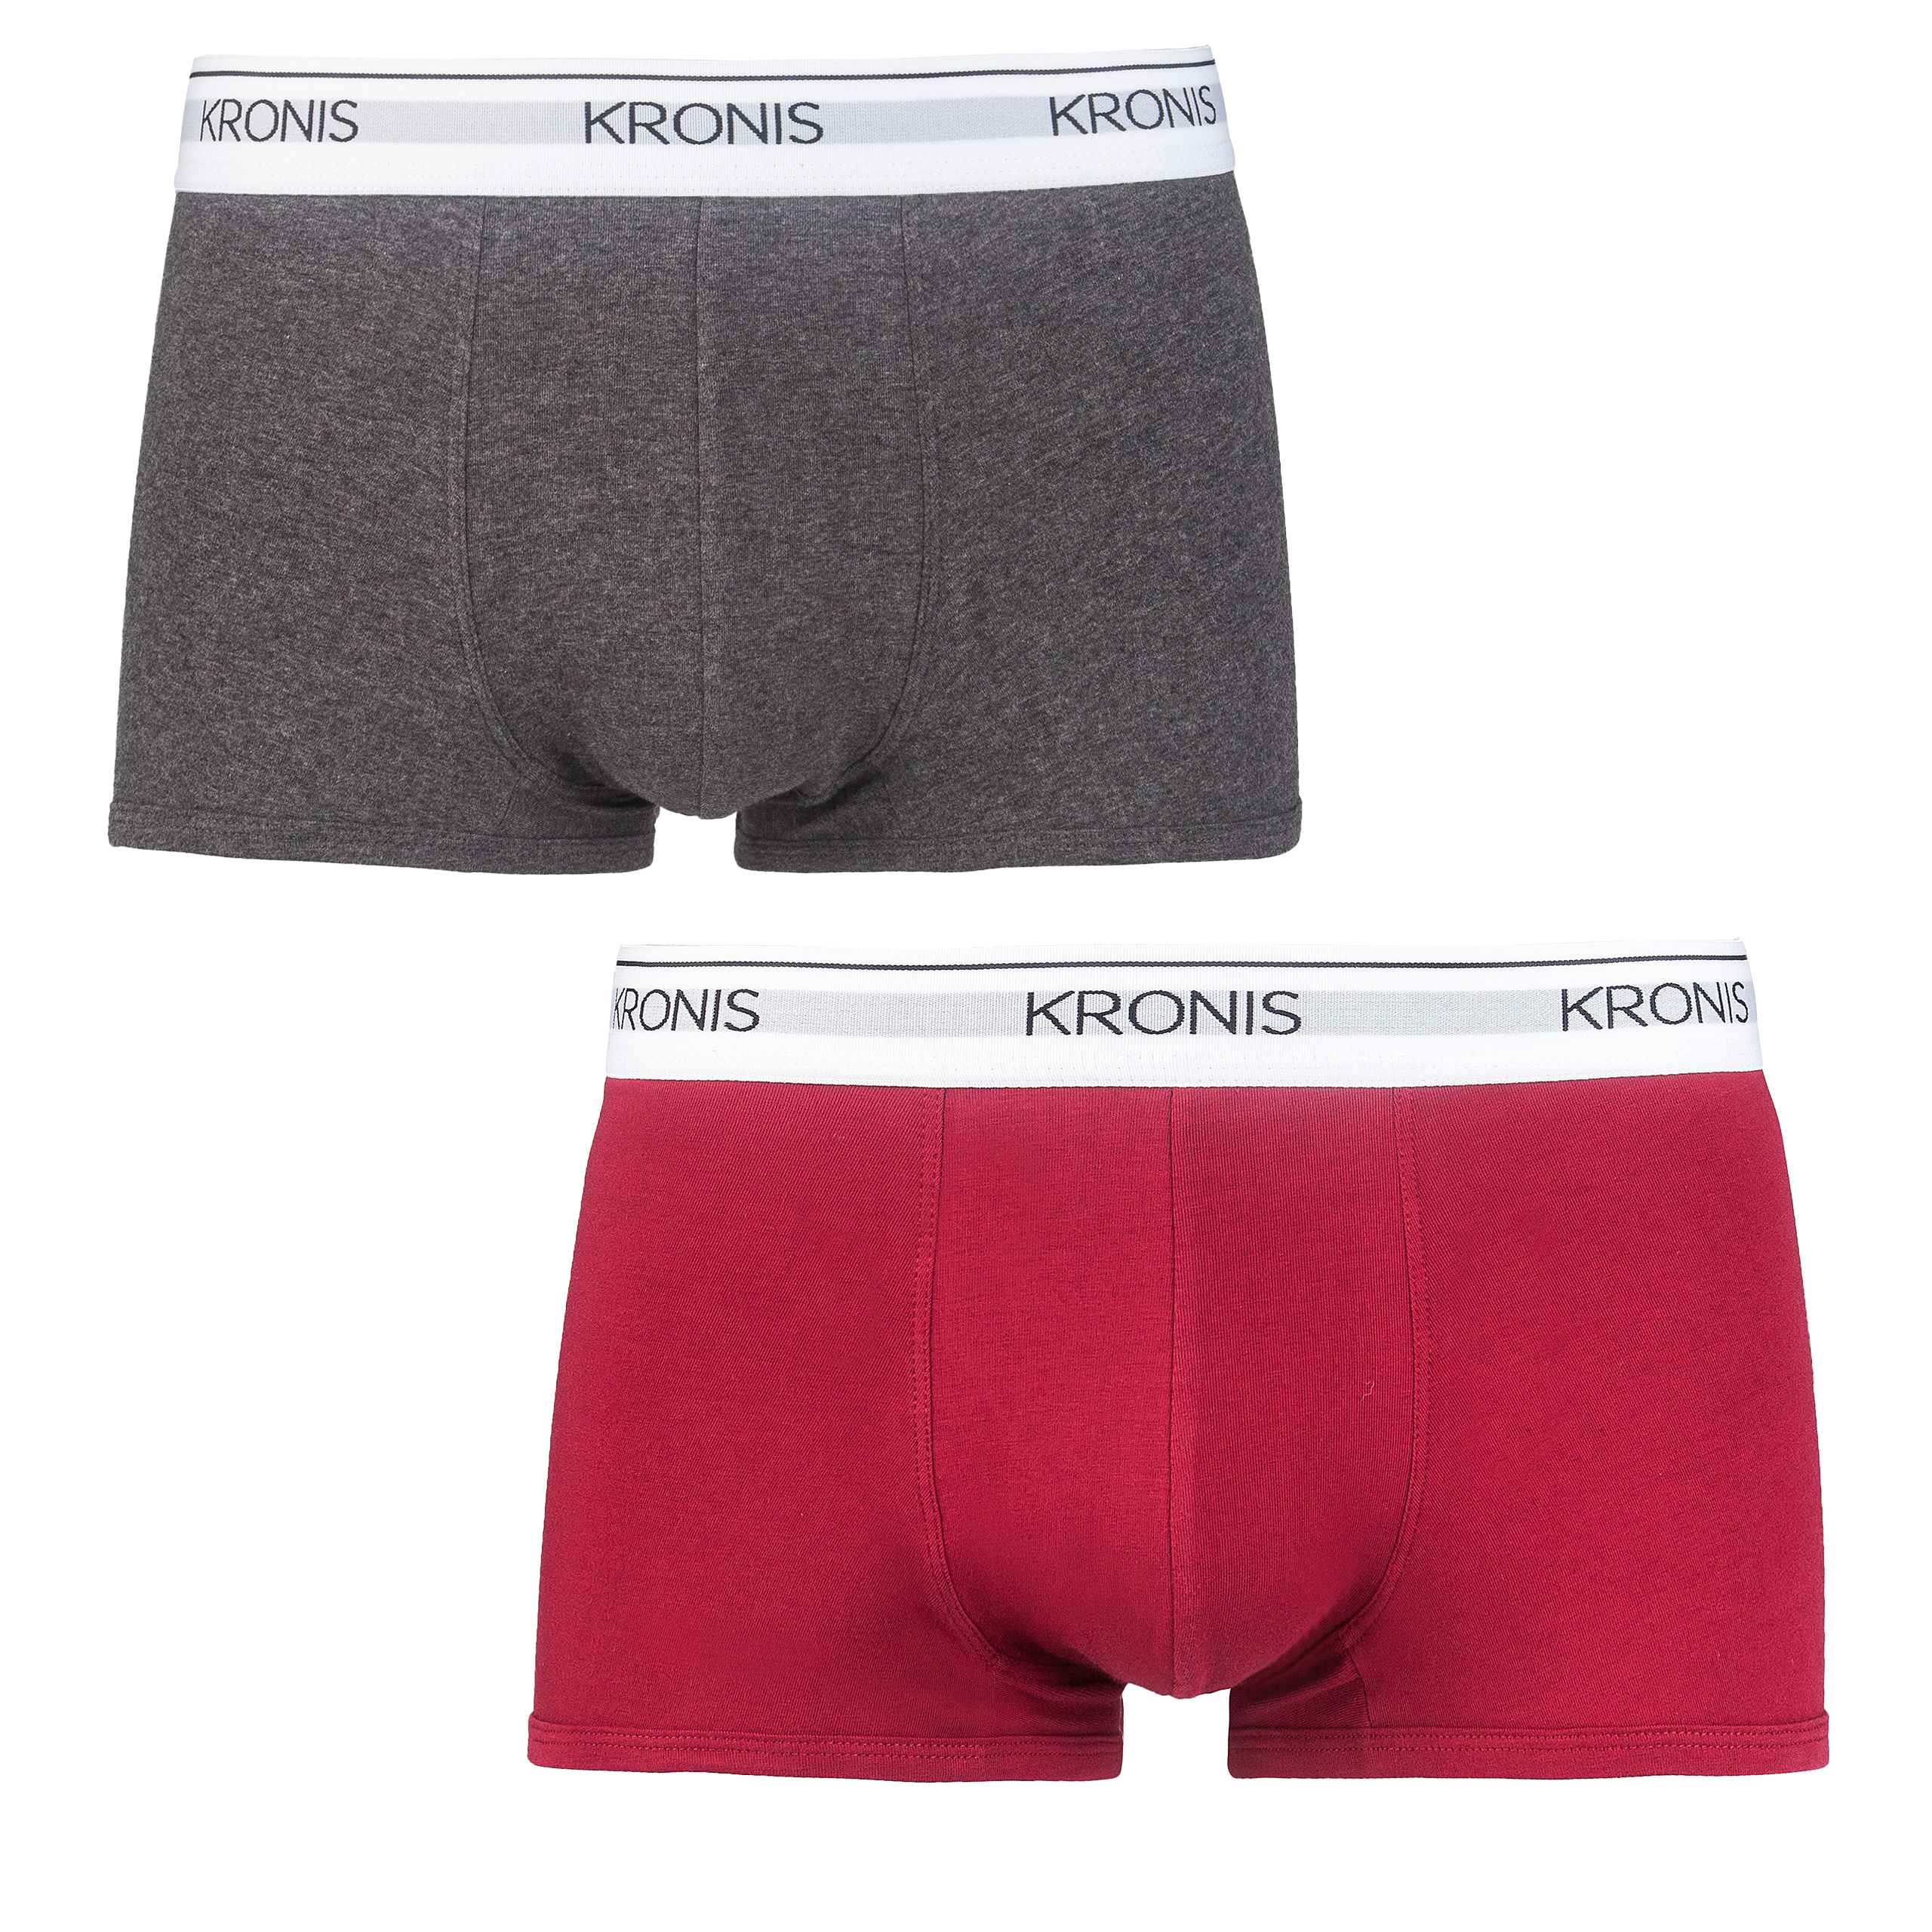 KRONIS Low Rise Trunks - Charcoal Grey + Maroon